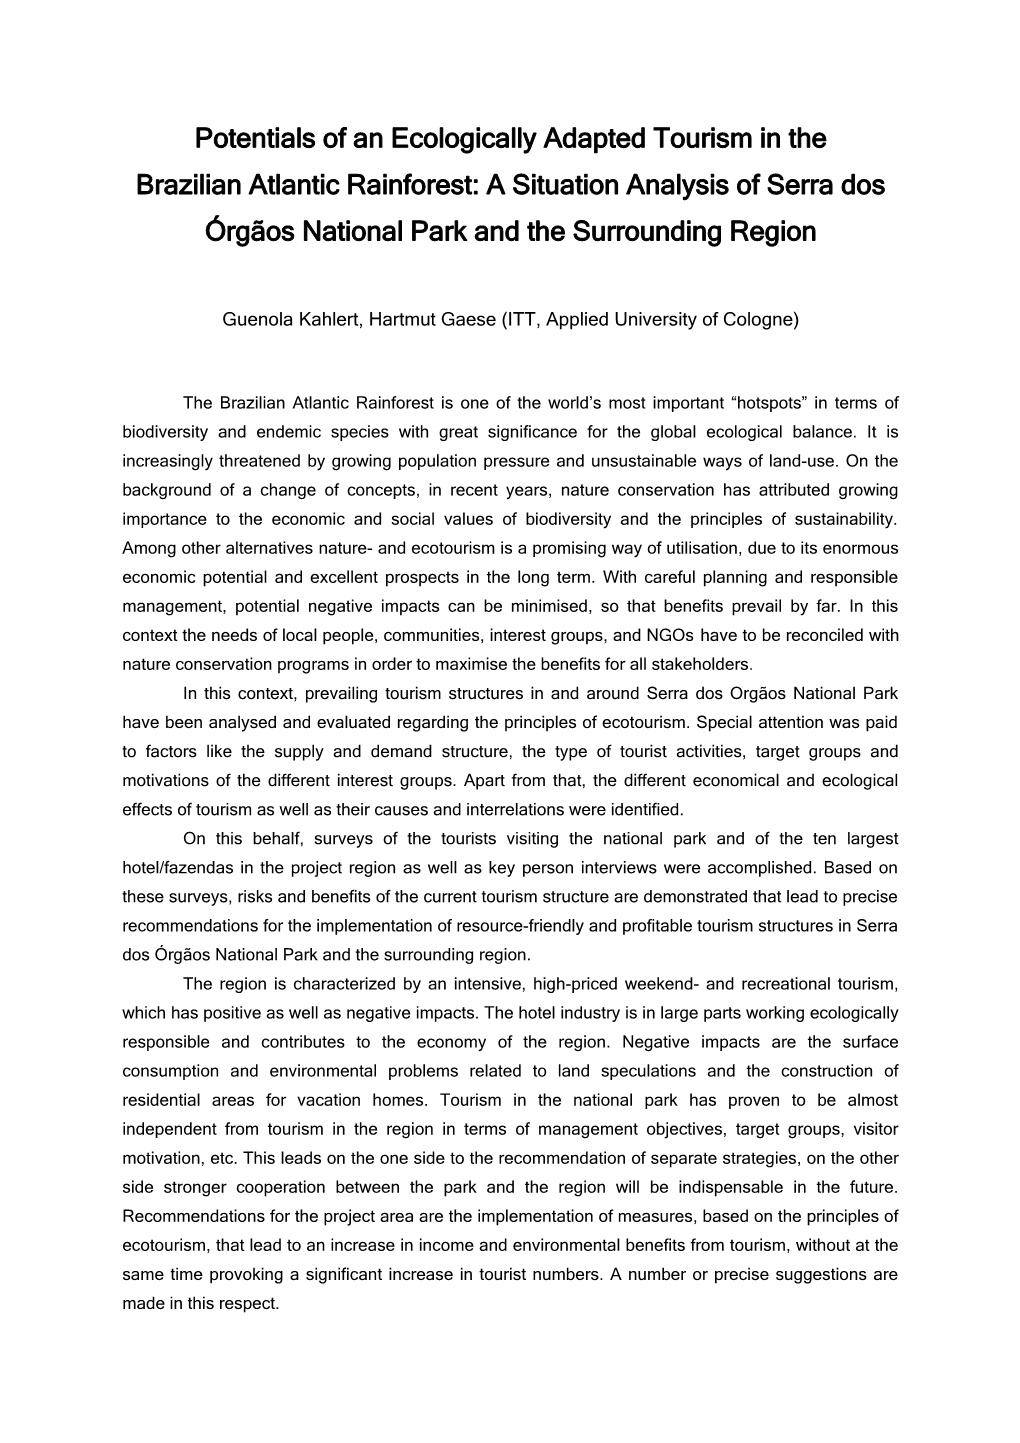 Potentials of an Ecologically Adapted Tourism in The